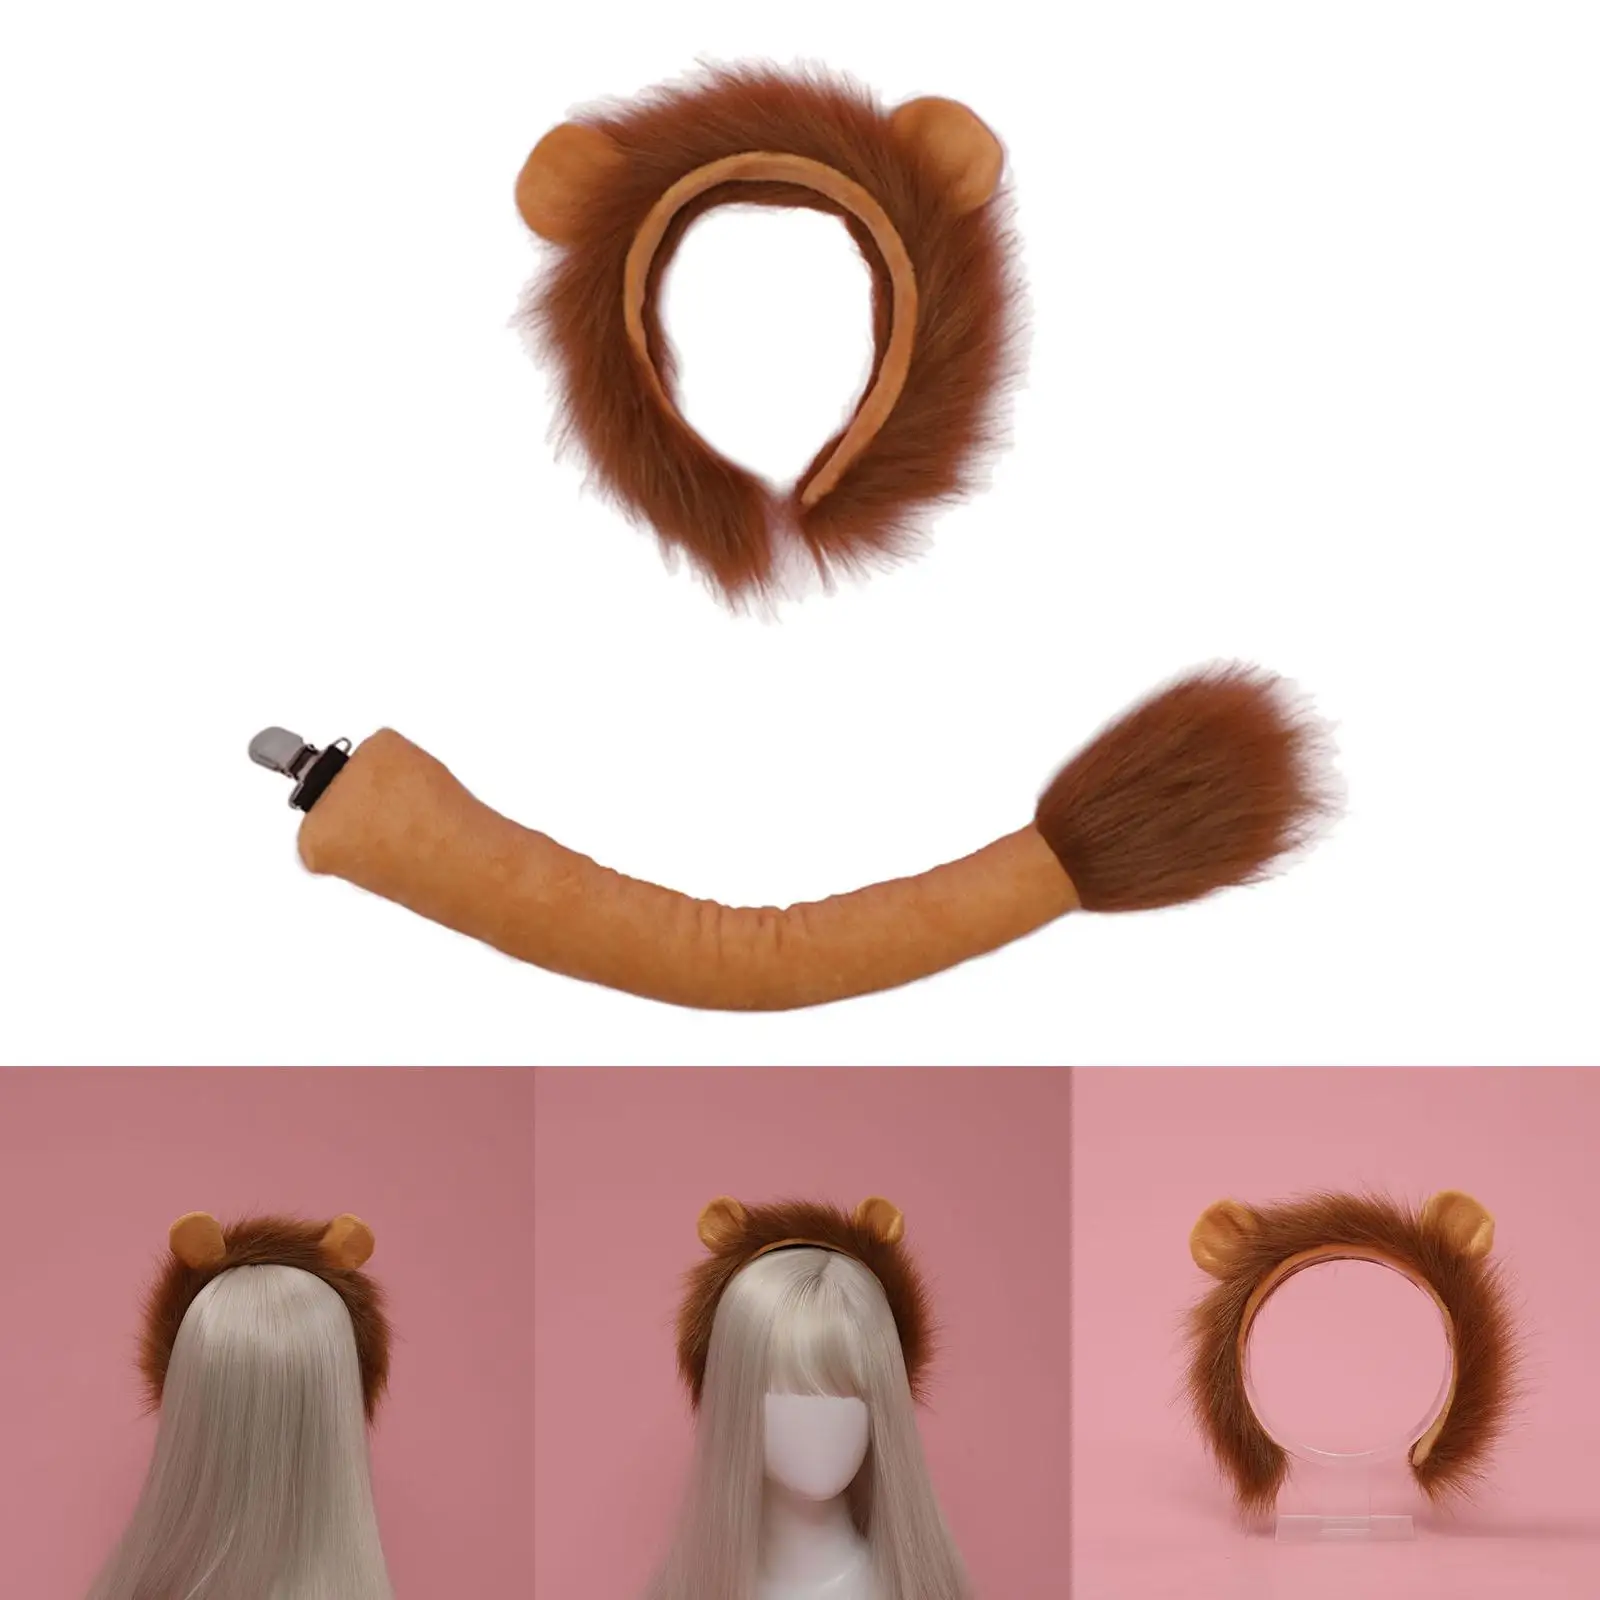  Tail Ears Costume Plush Headband Cosplay for Adult Children Teenager Show Carnival